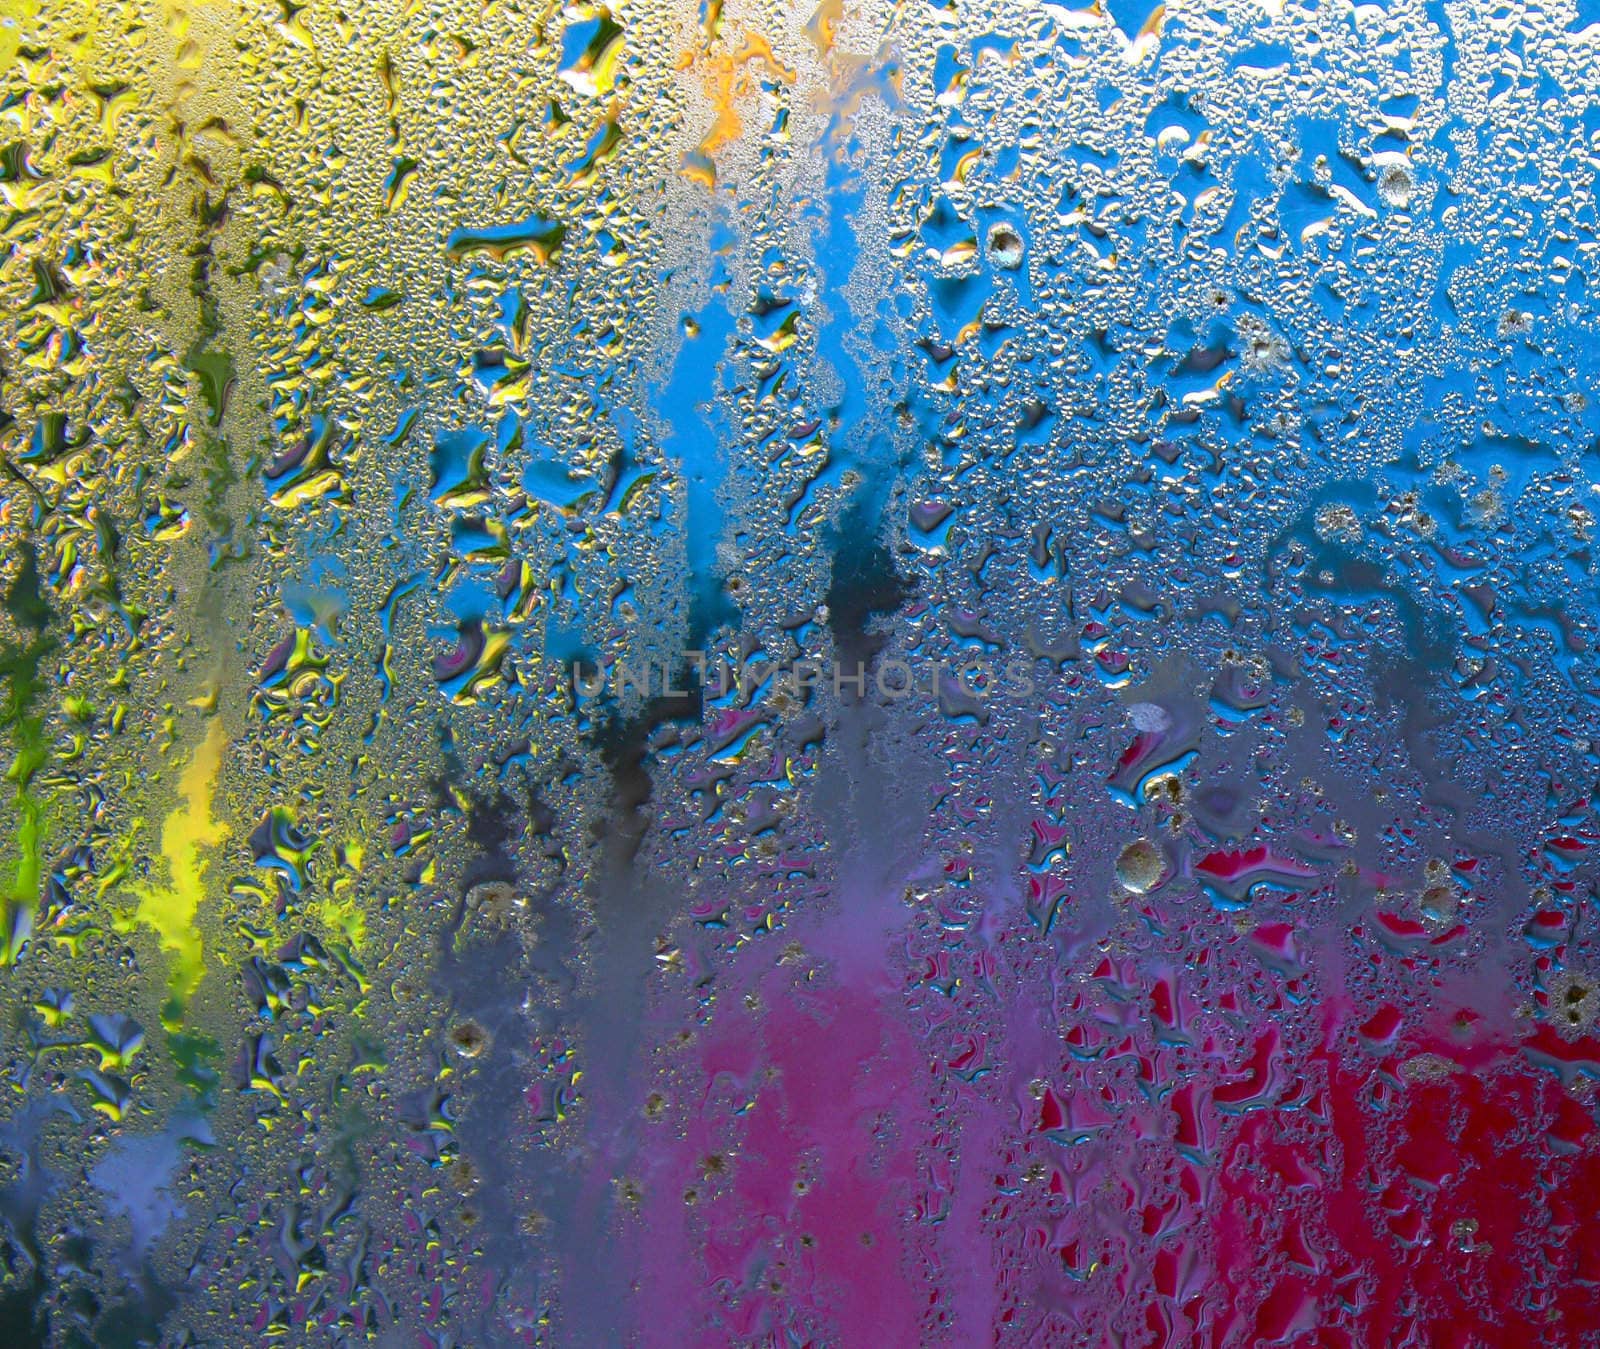 Condensation on window glass with blurred colors, primarily yellow, blue and red, in the background.